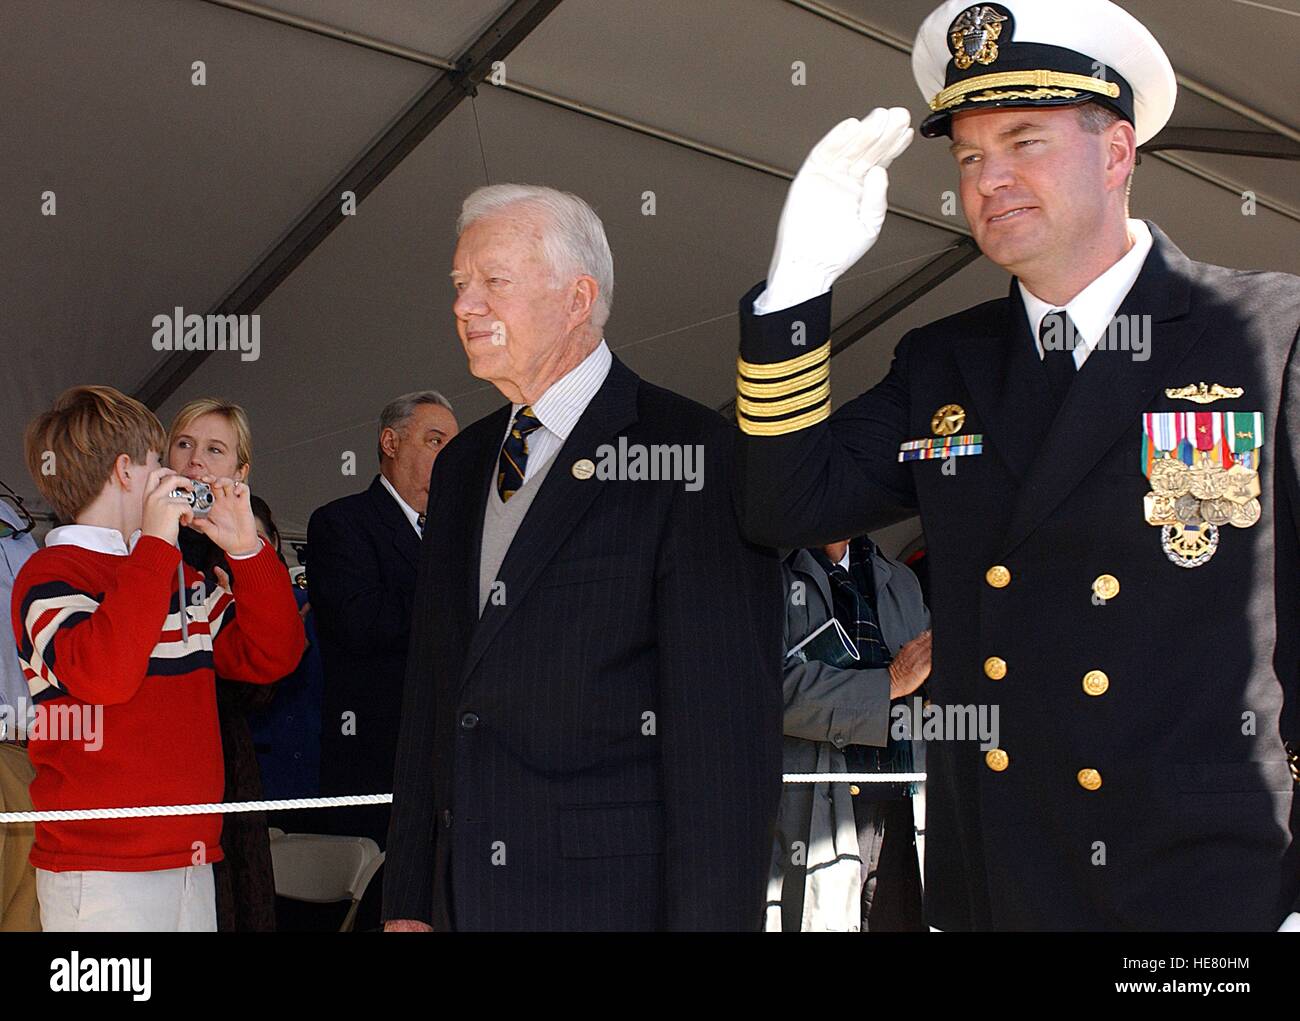 USN Commanding Officer Robert Kelso escorts former U.S. President Jimmy Carter past a crowd at the commissioning ceremony for the USN Seawolf-class attack submarine USS Jimmy Carter at the Naval Submarine Base New London February 19, 2005 in Groton, Connecticut. Stock Photo